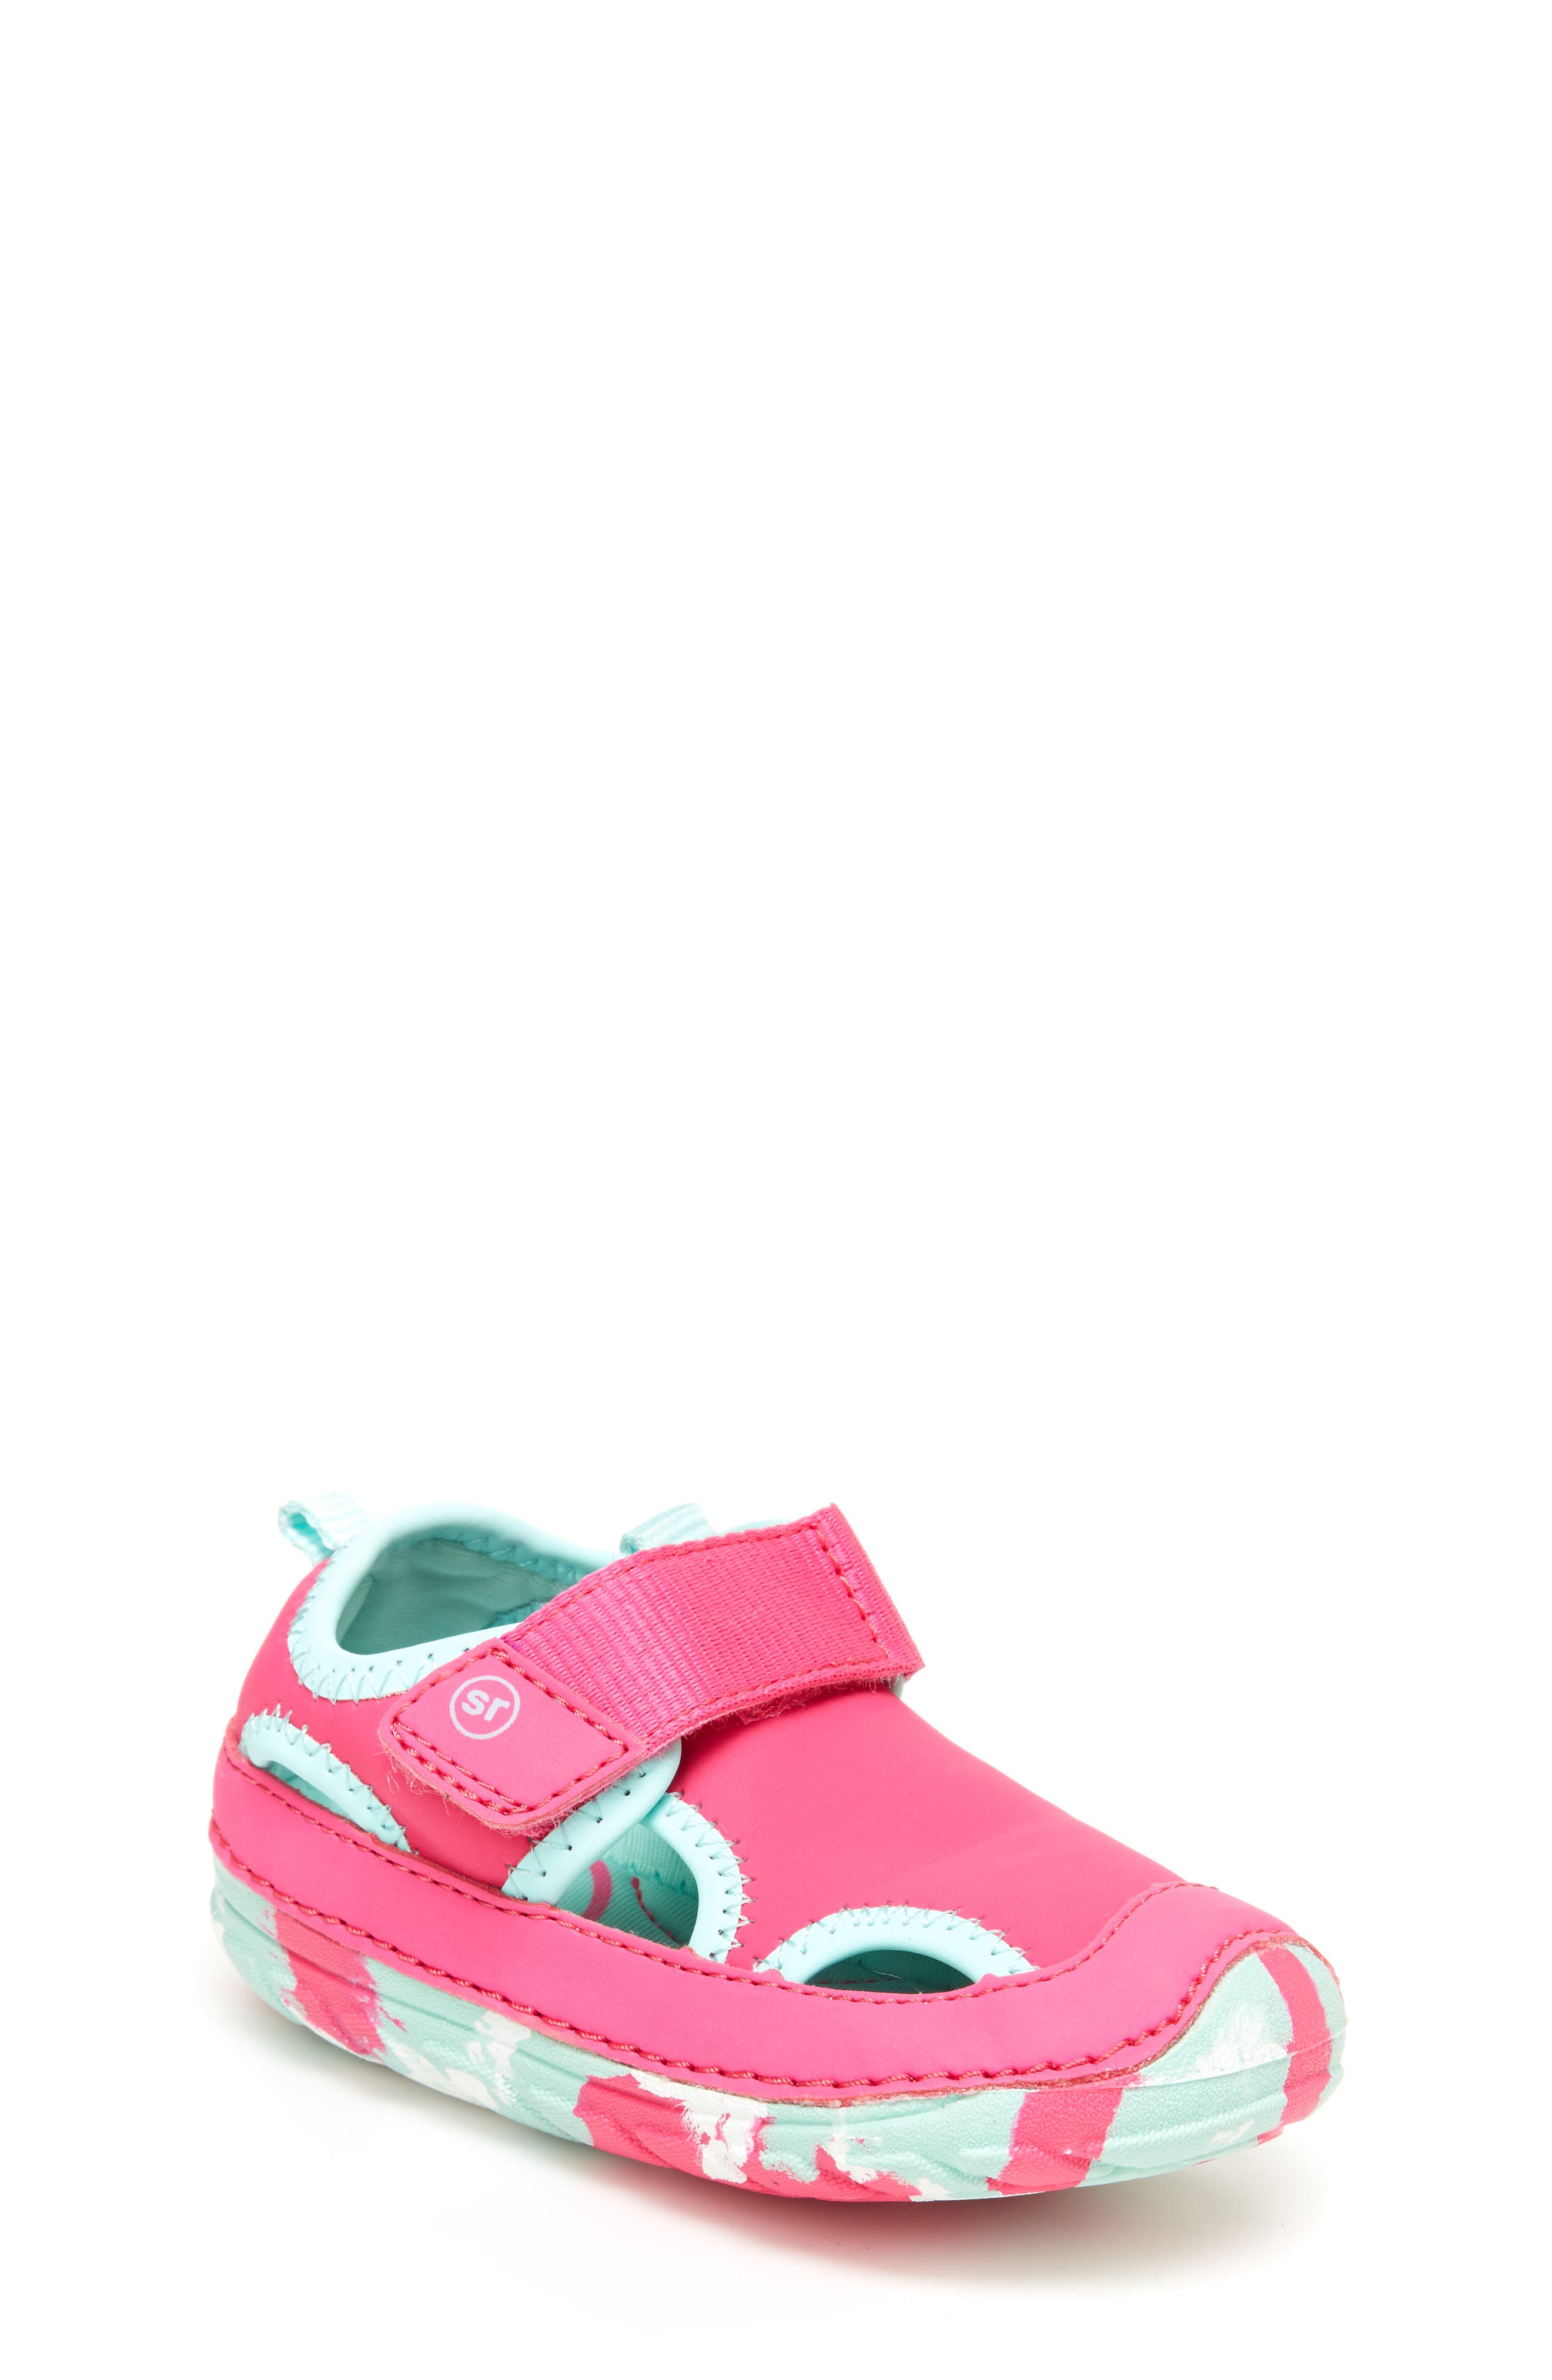 stride rite water shoes